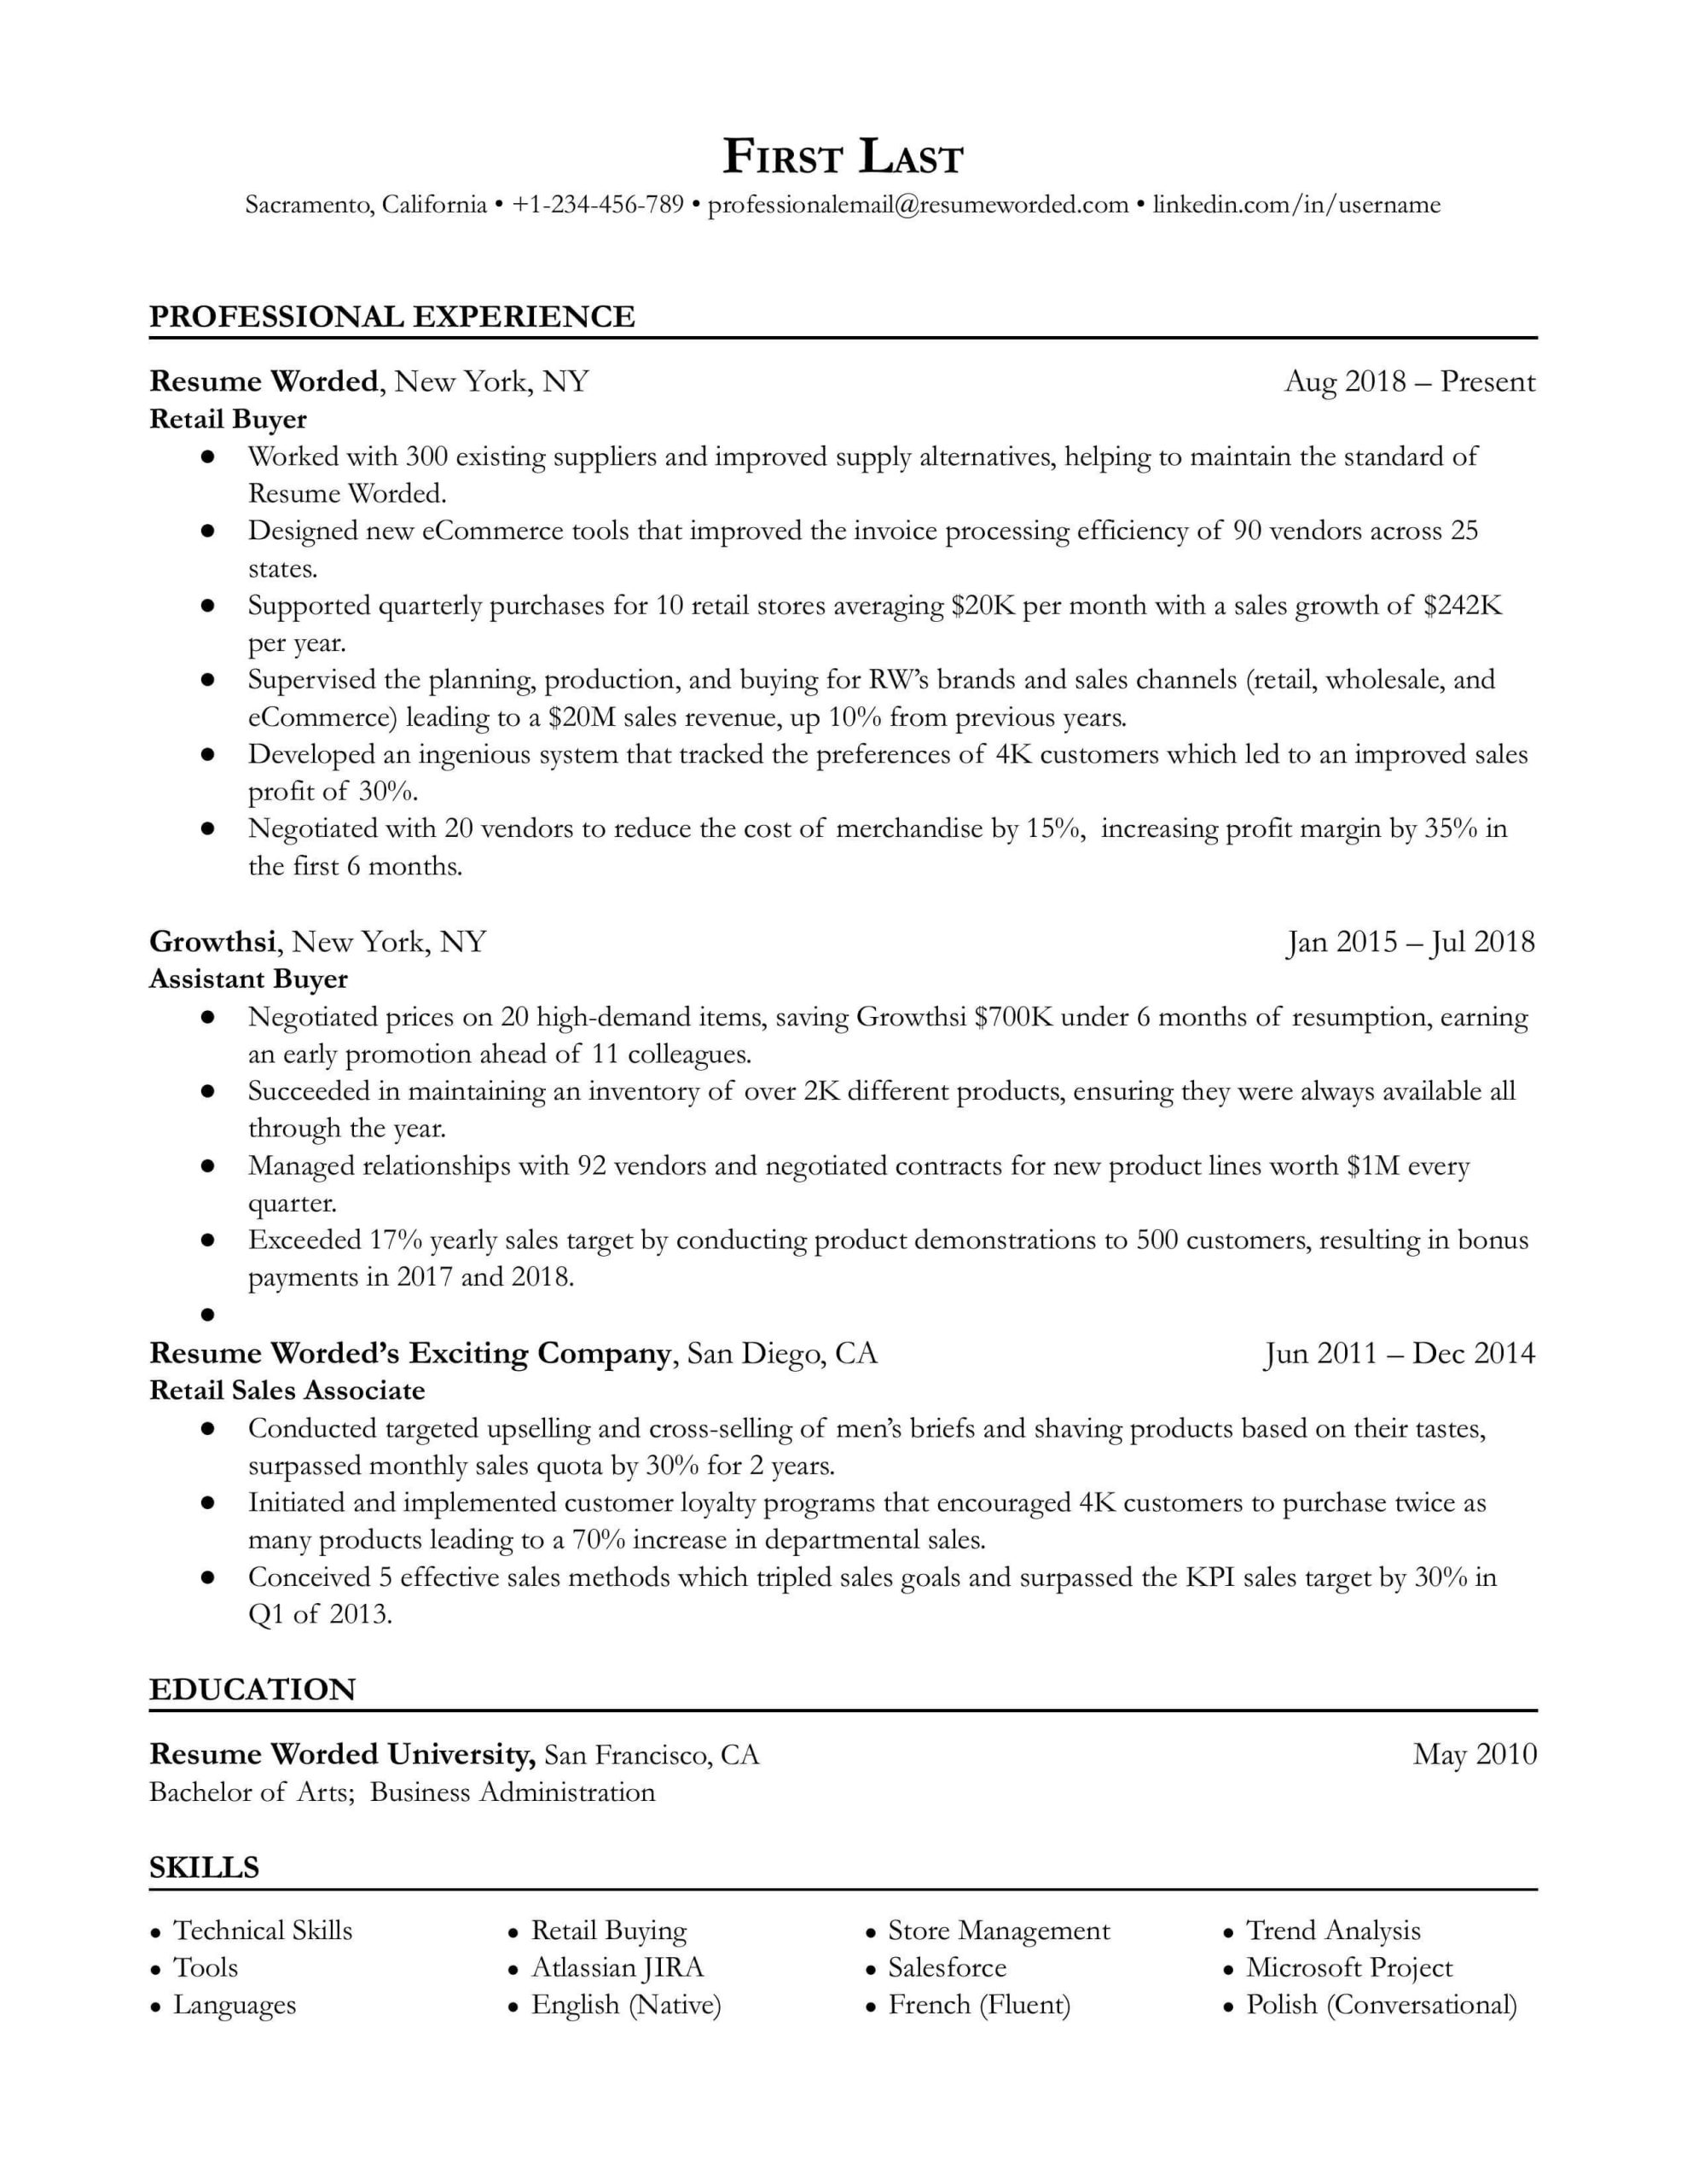 Sample Resume for Entry Level Retail Position 5 Retail Resume Examples for 2022 Resume Worded